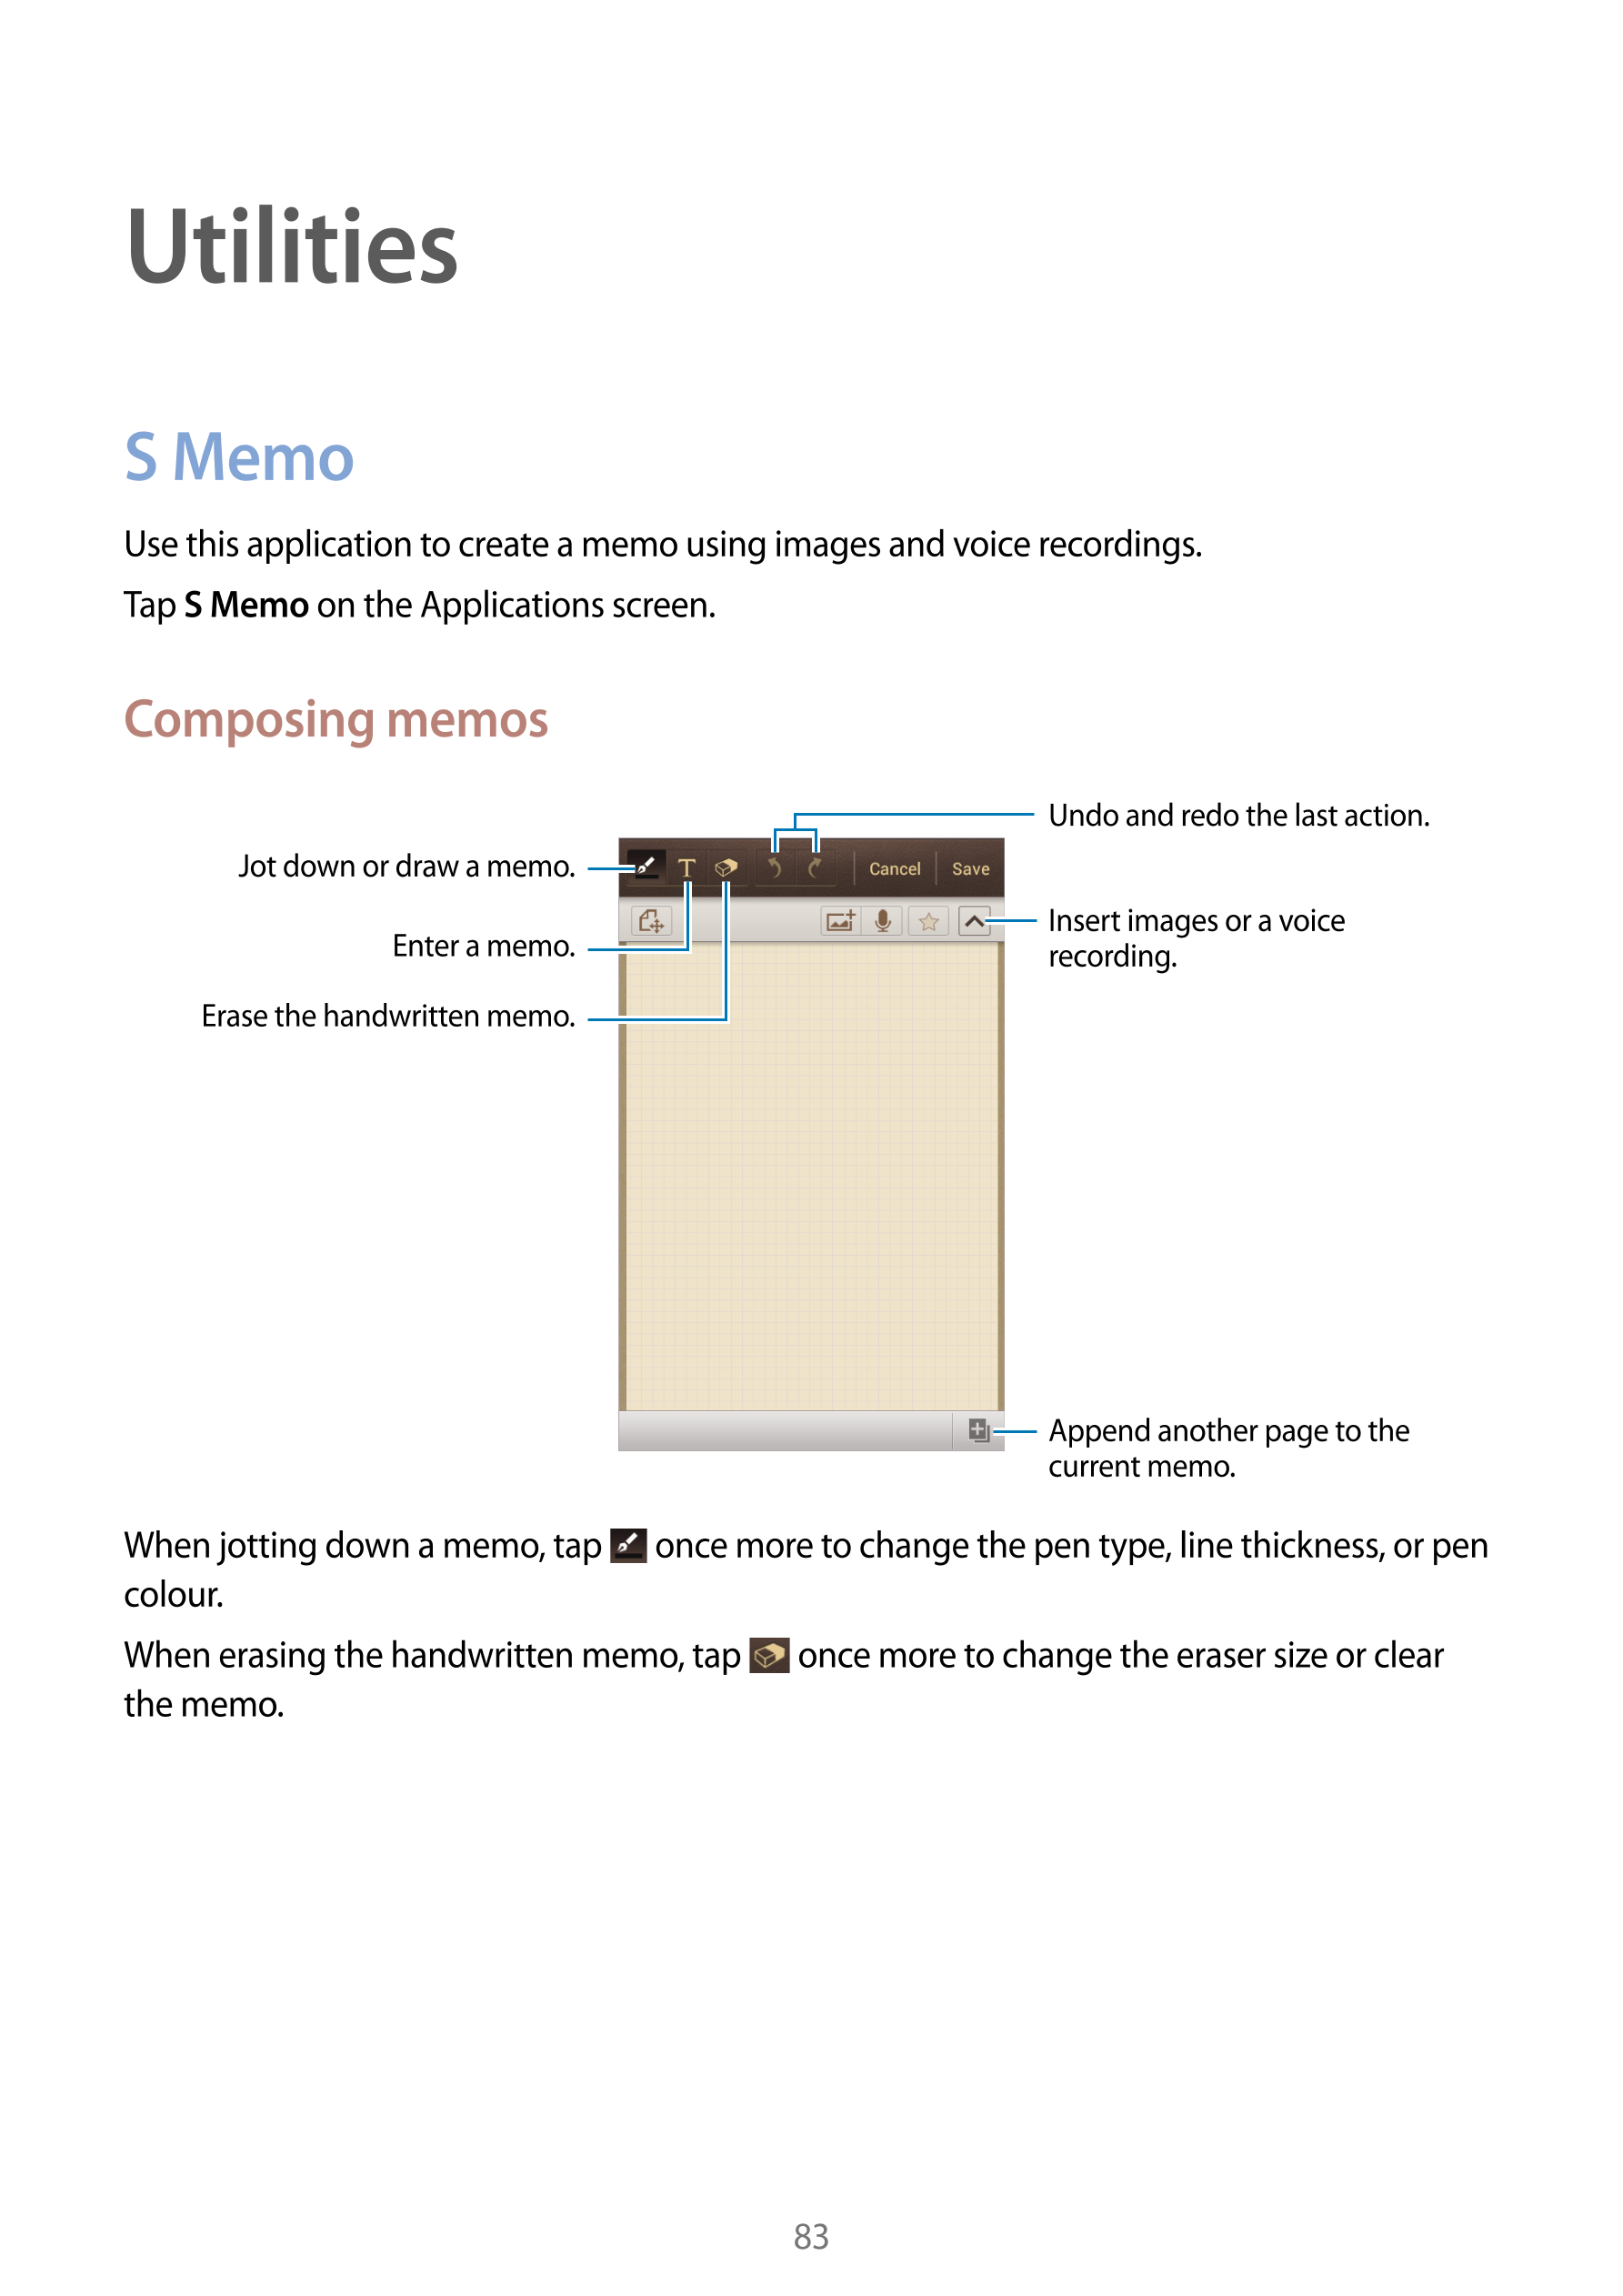 Utilities
S Memo
Use this application to create a memo using images and voice recordings.
Tap  S Memo on the Applications screen